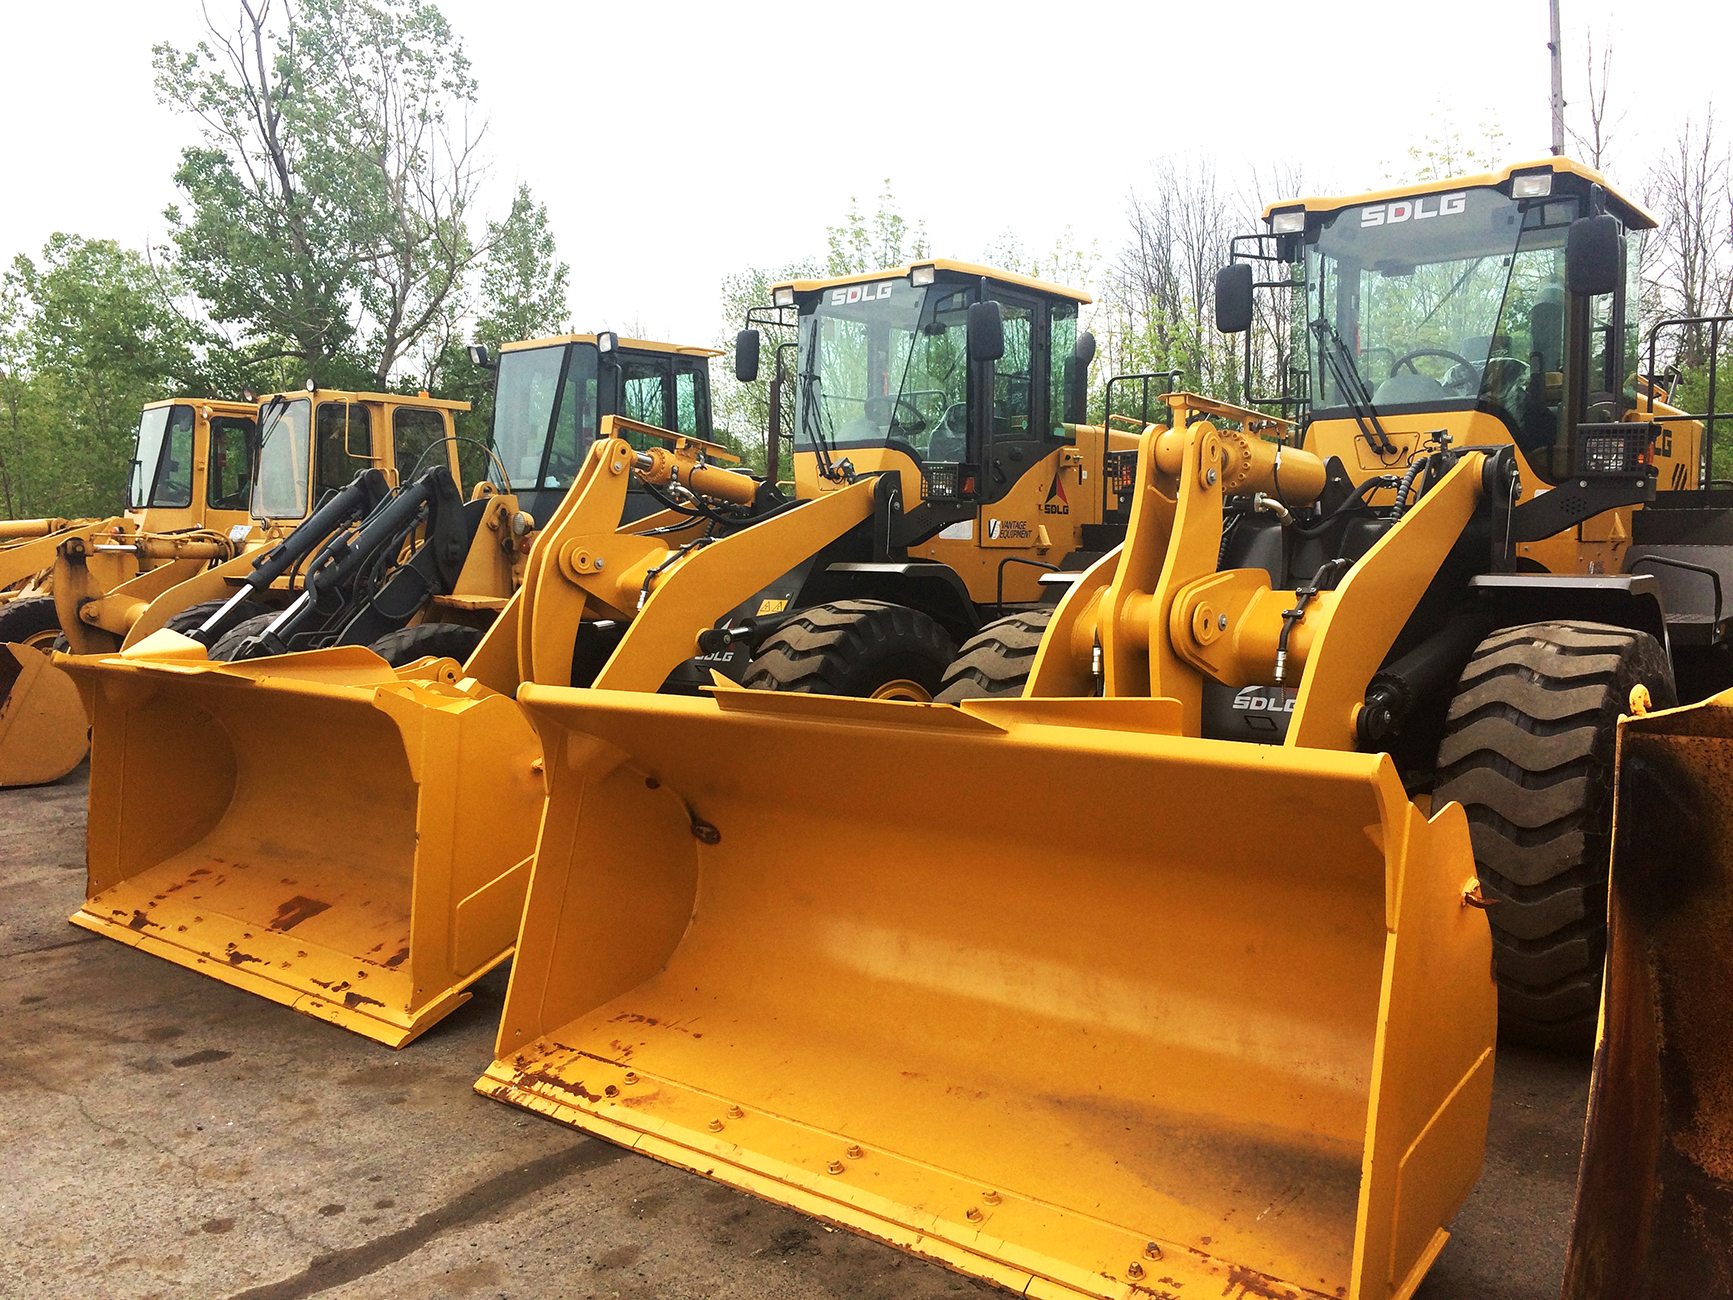 Boon & Sons chooses SDLG front end loaders for snow removal in upstate New York